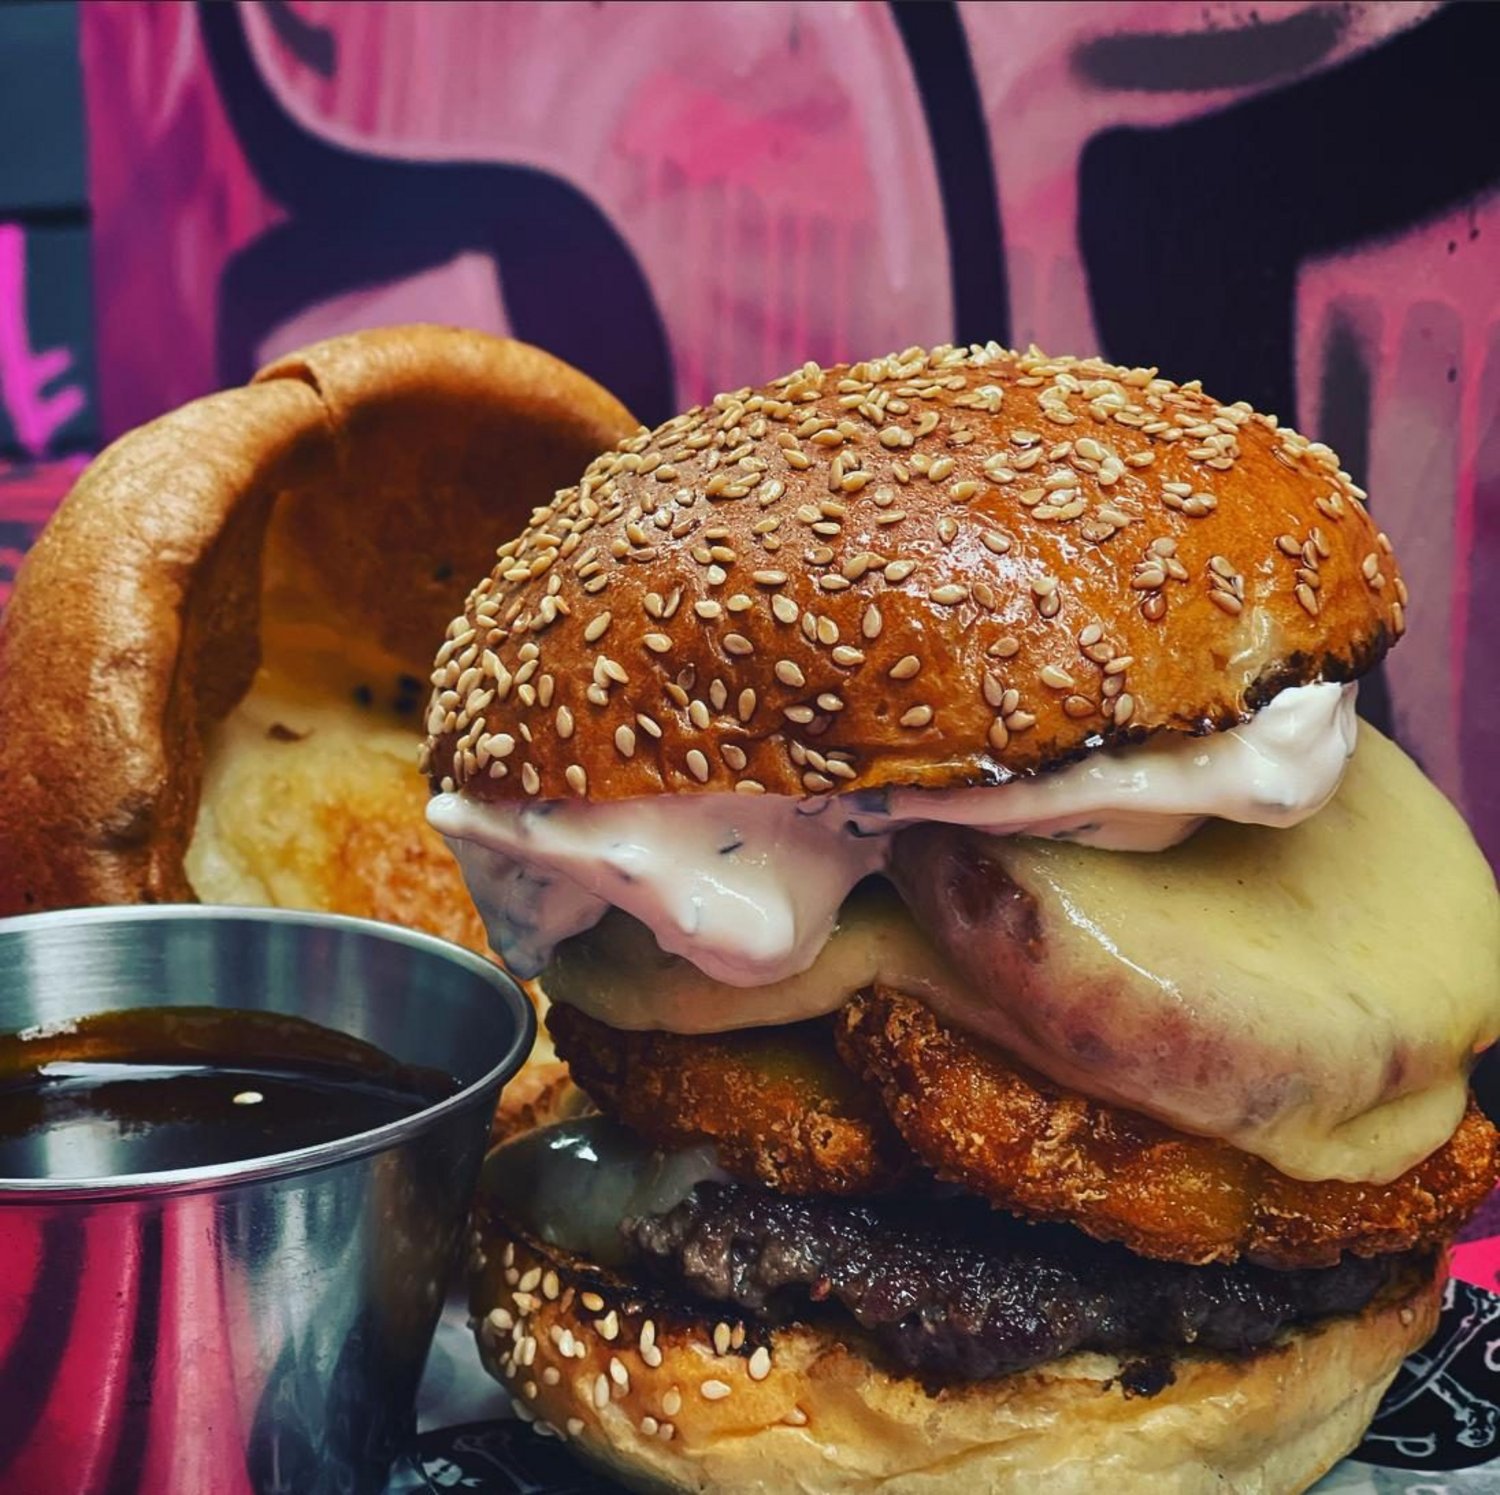 Northampton’s popular street food pop-up Bite Street will launch a new eating experience for the town this weekend at Franklin's Gardens – Burger Street